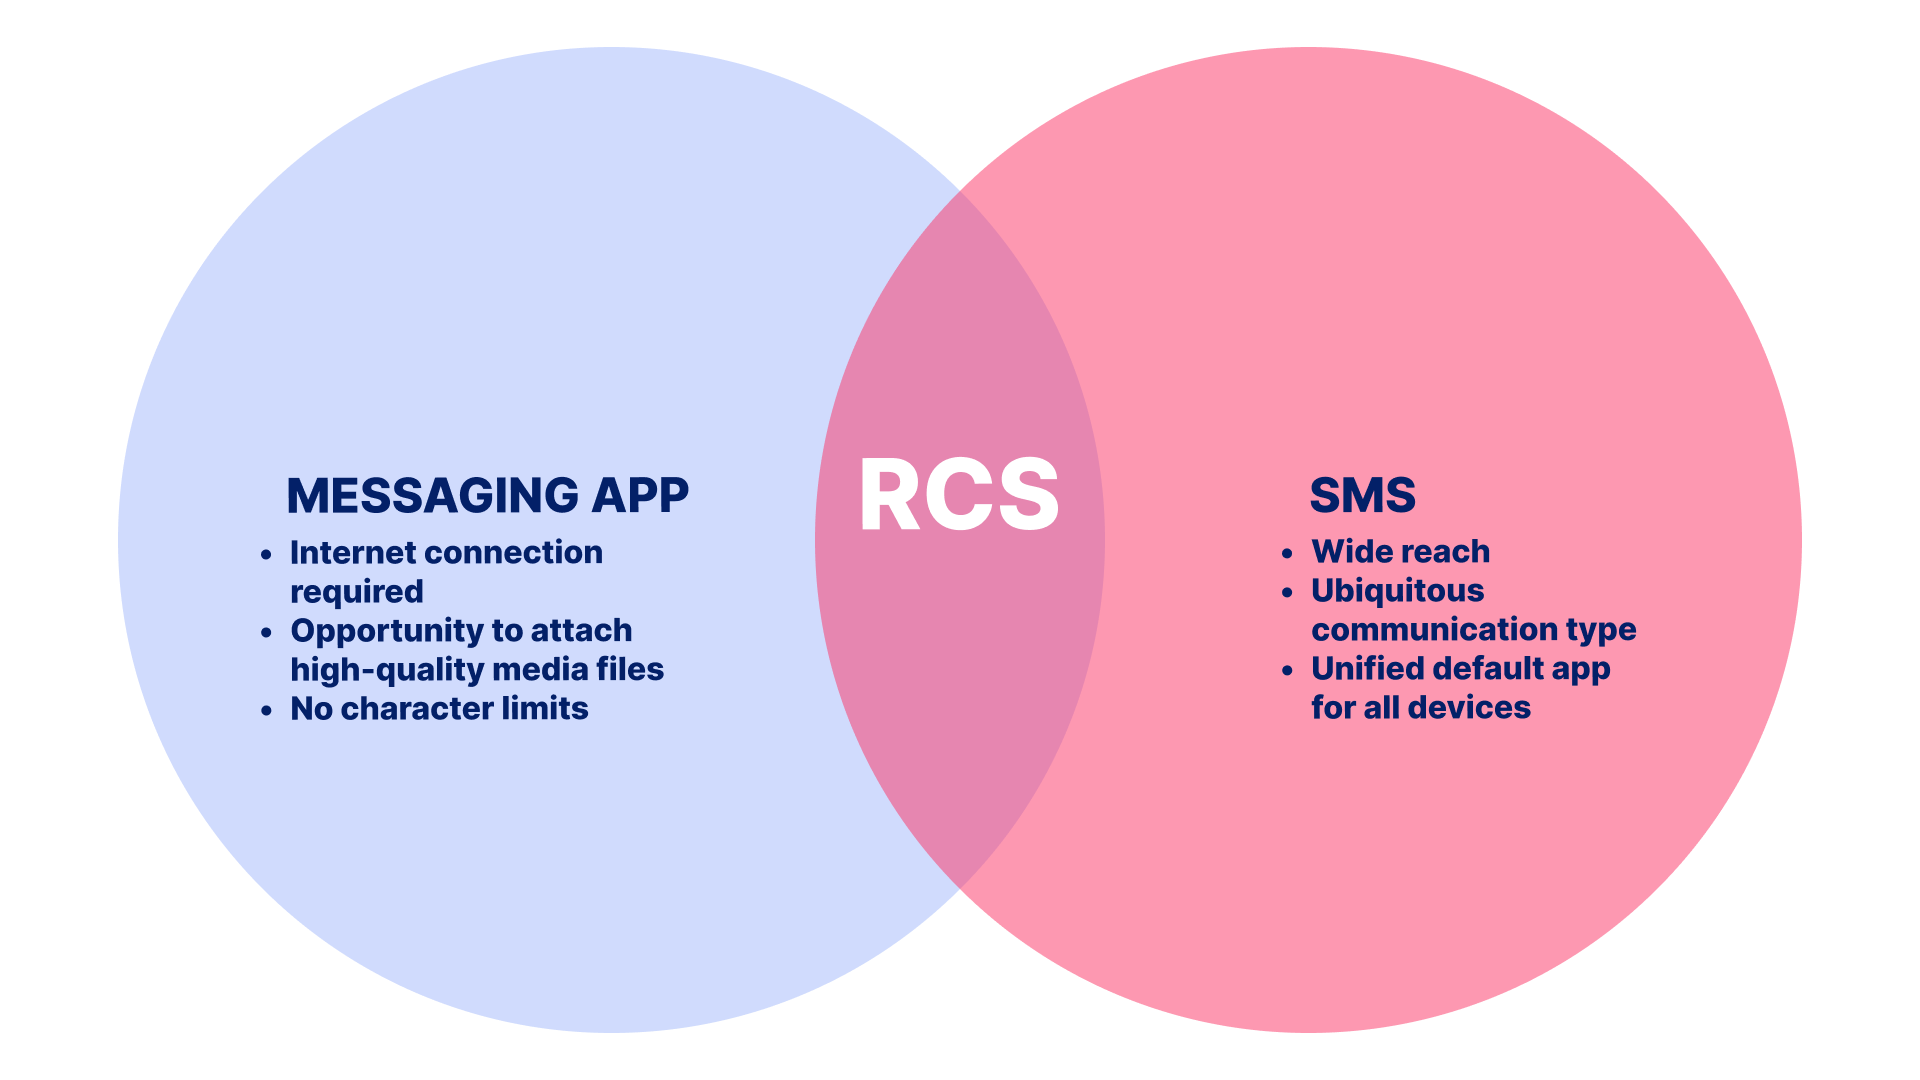 RCS combines various features of SMS and messengers